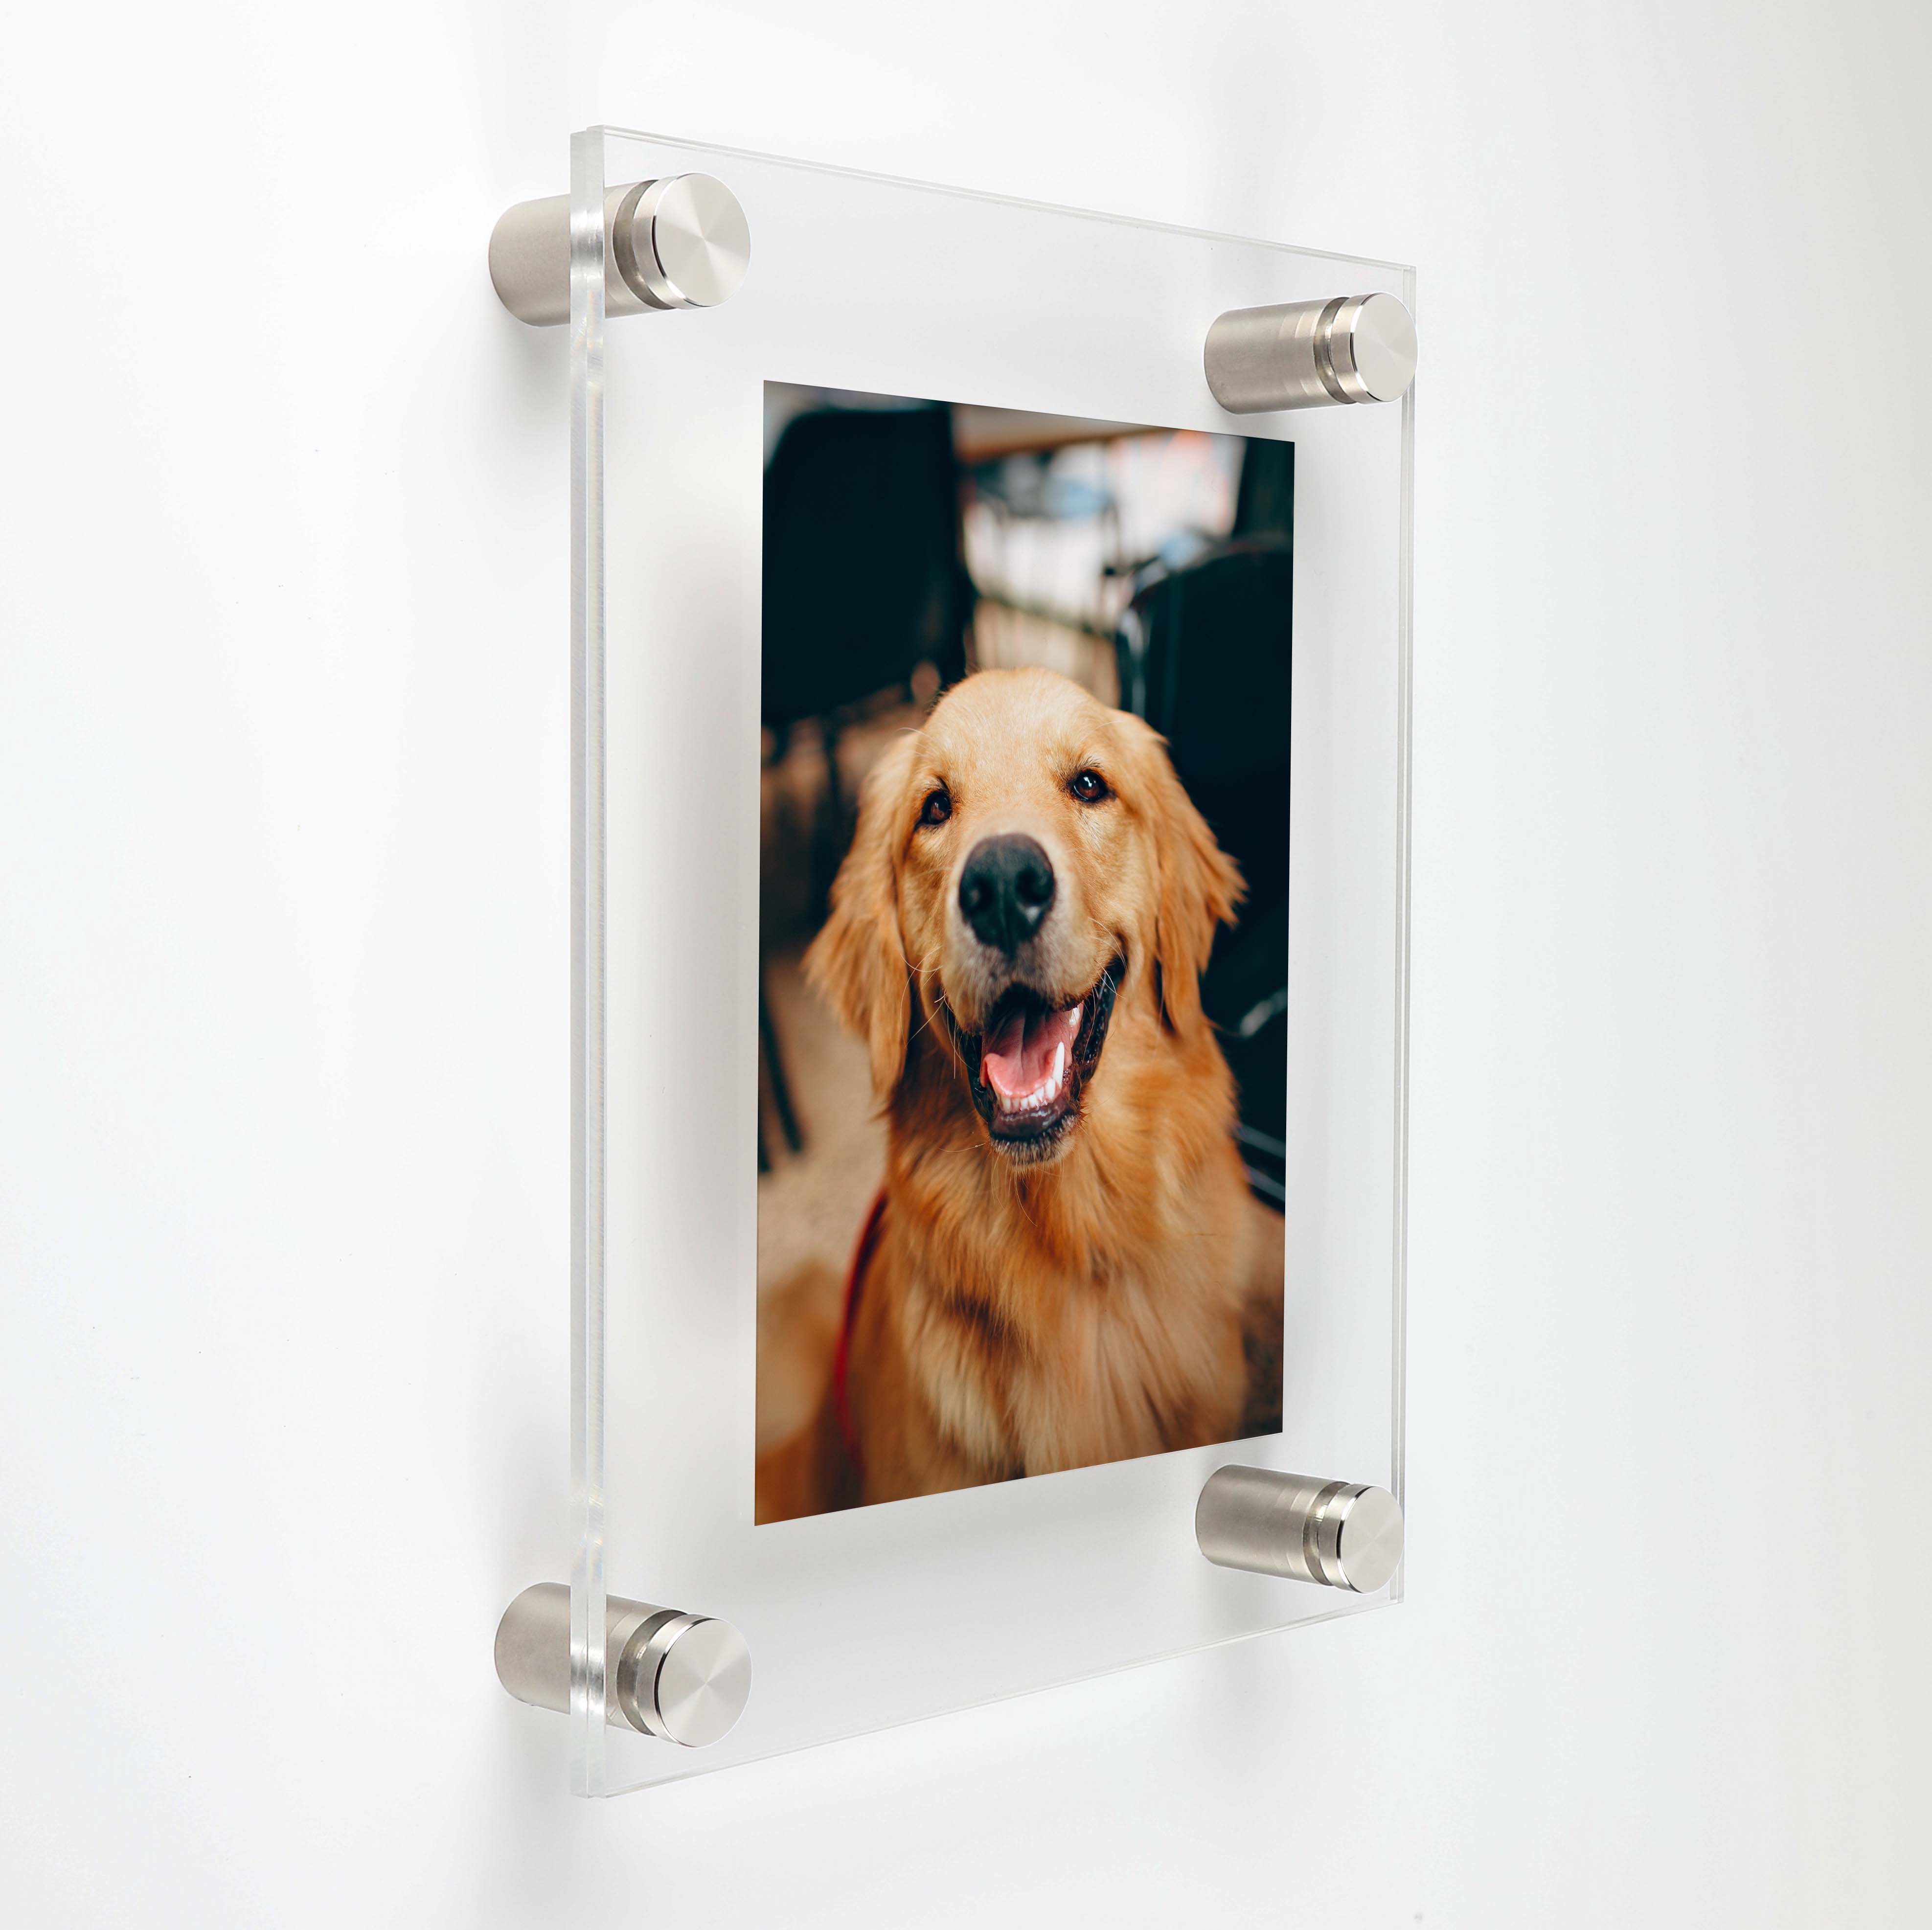 (2) 13-1/2'' x 16-1/2'' Clear Acrylics , Pre-Drilled With Polished Edges (Thick 1/8'' each), Wall Frame with (4) 5/8'' x 1'' Brushed Stainless Steel Standoffs includes Screws and Anchors